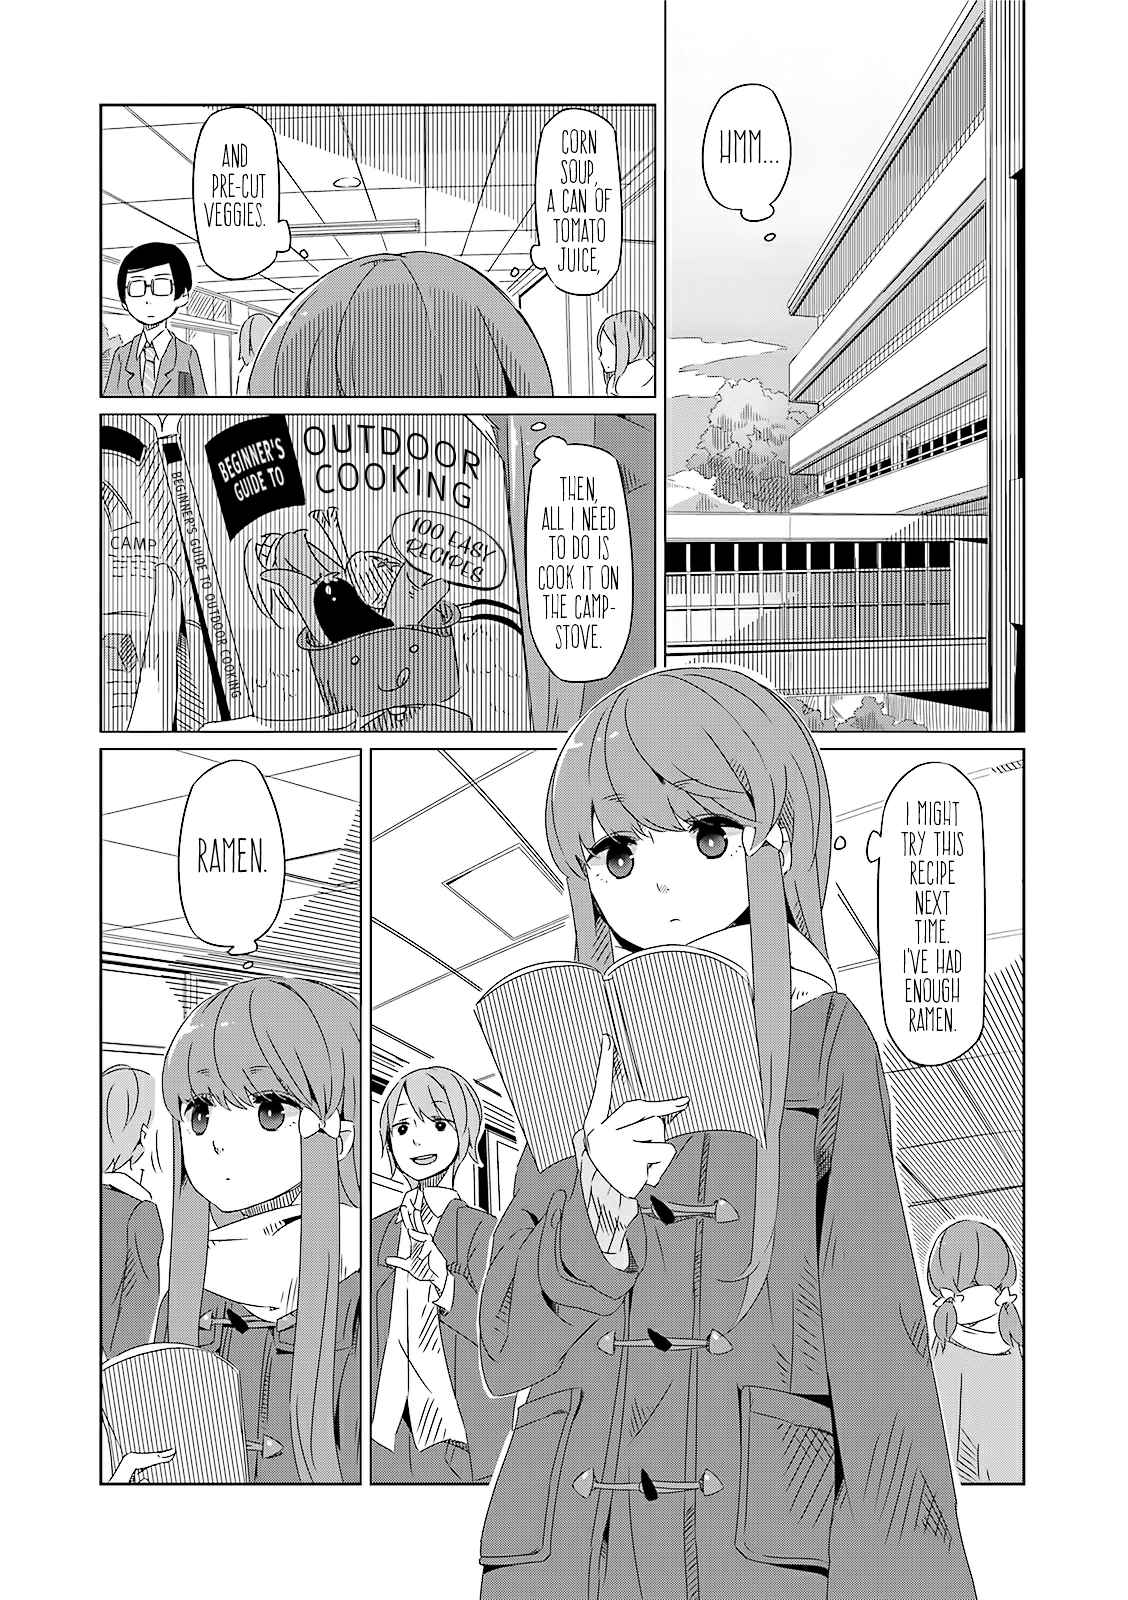 Yurucamp △ Vol. 1 Ch. 2 Welcome to the Outdoors Club!